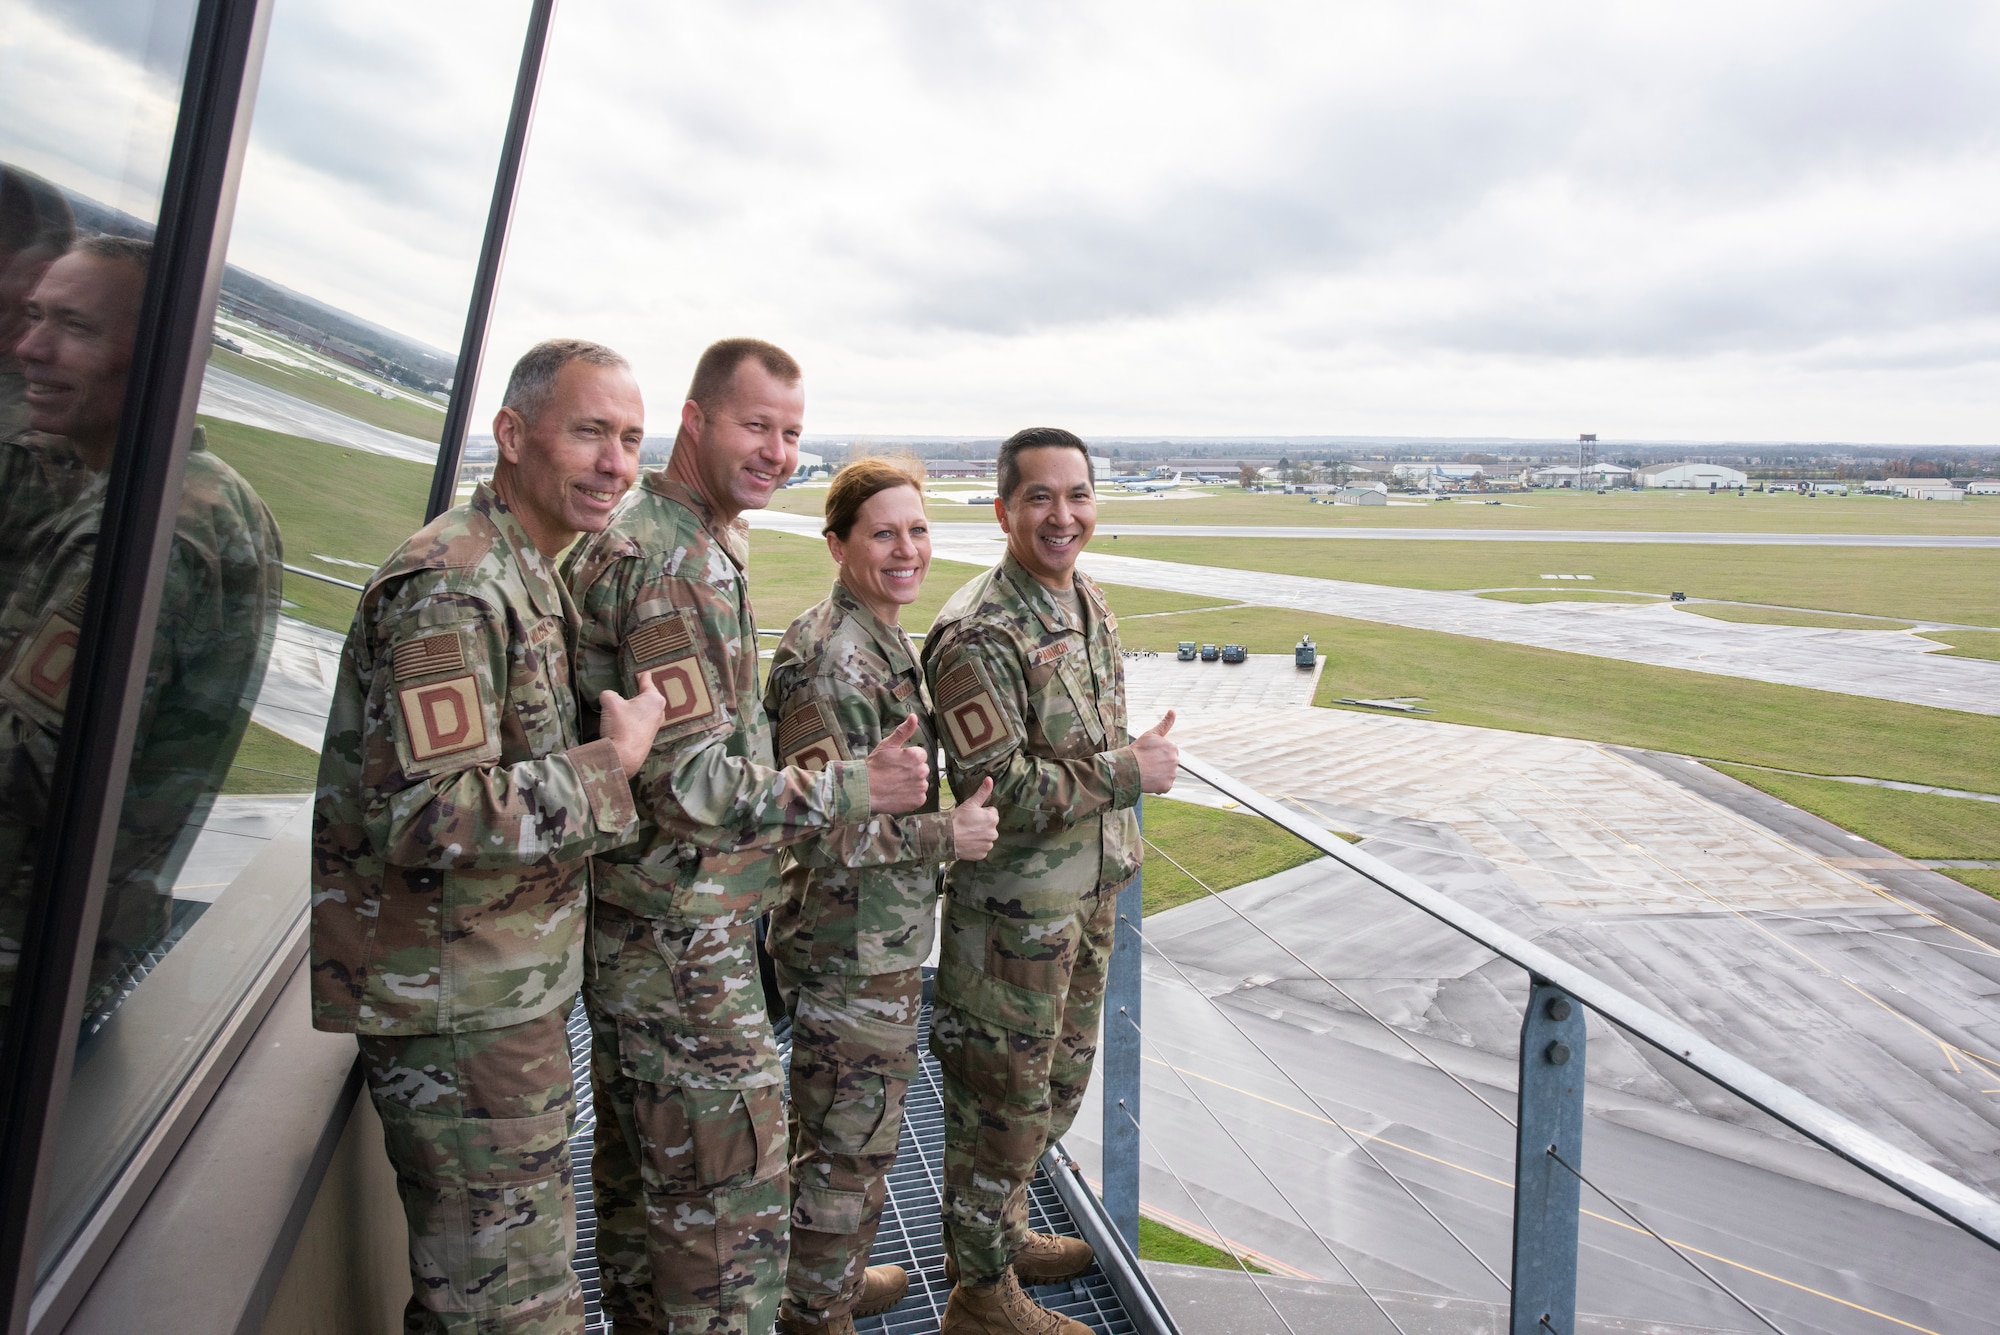 Maj. Gen. John Wilcox, Air Force Installation and Mission Support Center commander, and Chief Master Sgt. Edwin Ludwigsen, AFIMSC command chief master sergeant, pose for a photo with 100th Air Refueling Wing leadership at the control tower Nov. 22, 2019, at RAF Mildenhall, England. The AFIMSC provides installation and mission support that enables Team Mildenhall to complete its varied mission sets. (U.S. Air Force photo by Airman 1st Class Joseph Barron)